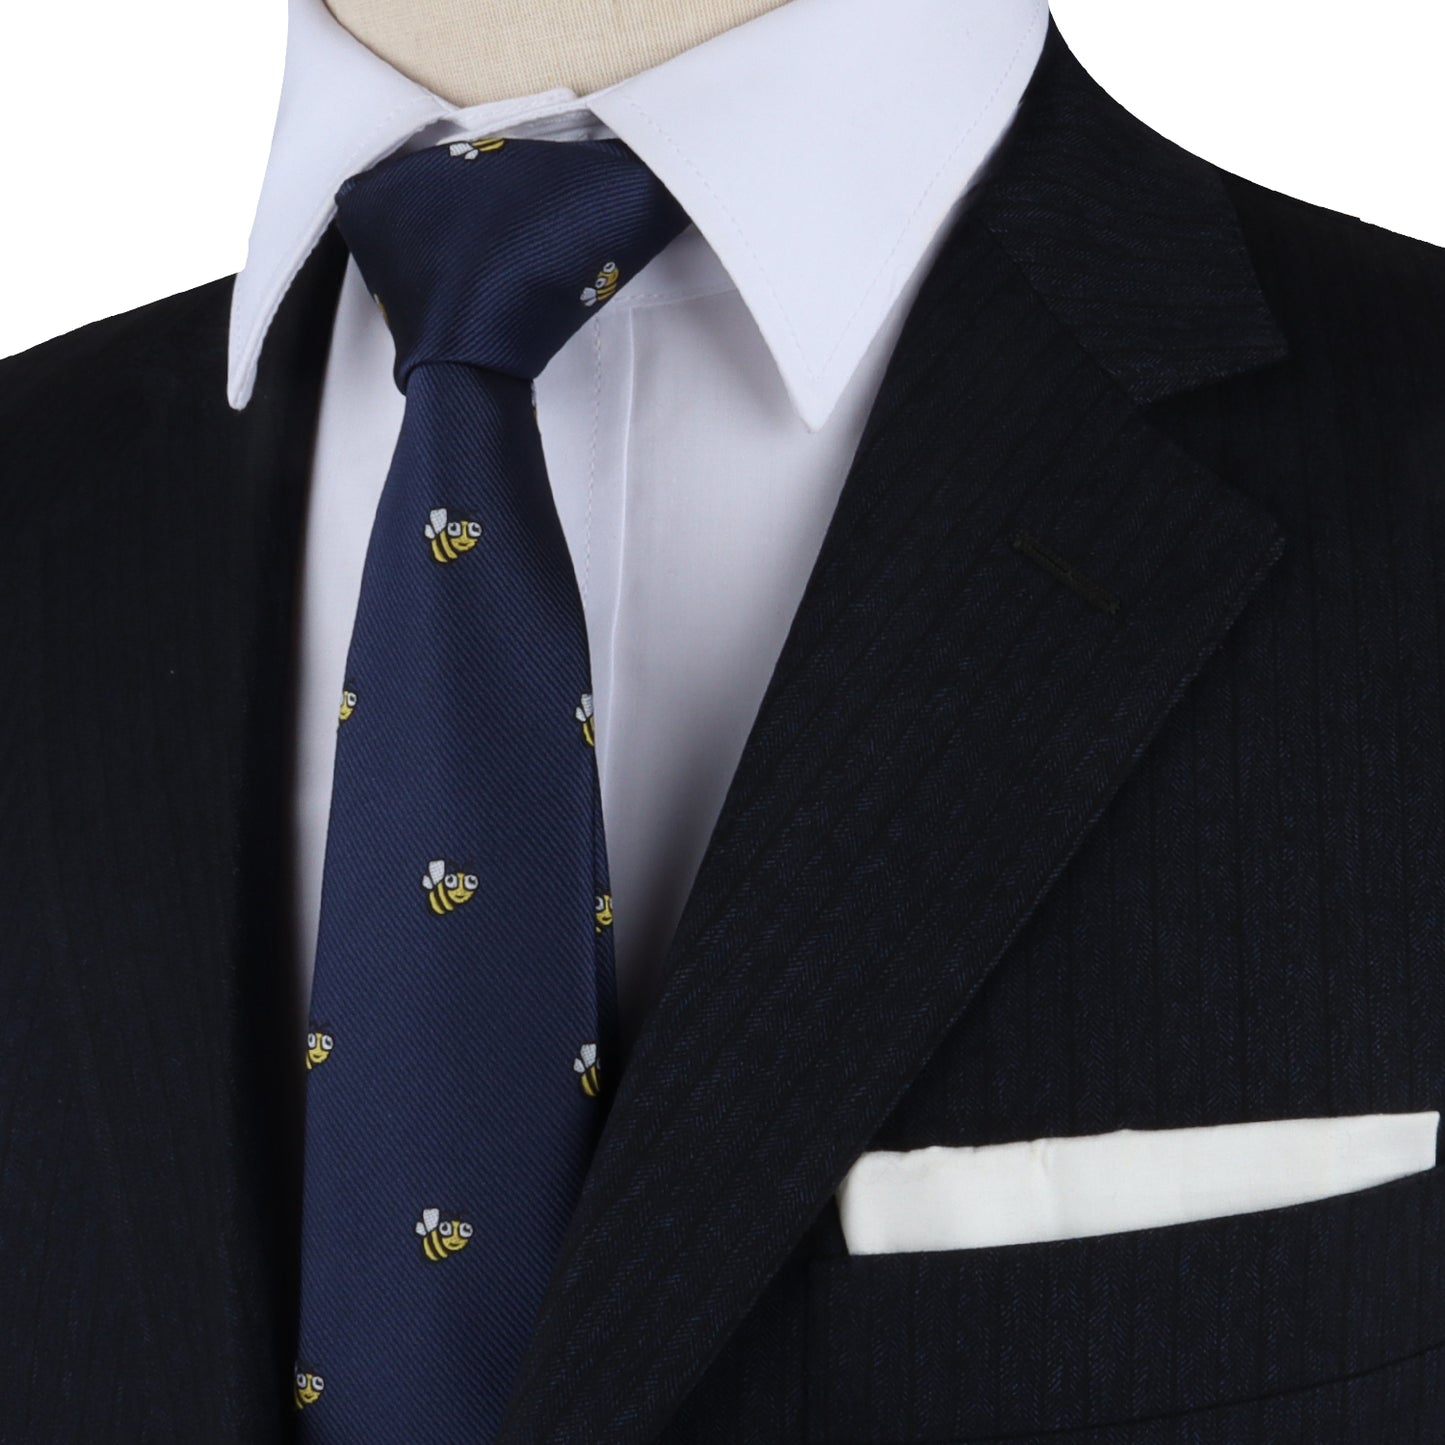 A mannequin exuding allure in a stylish suit, Bee Skinny Tie, and pocket square.